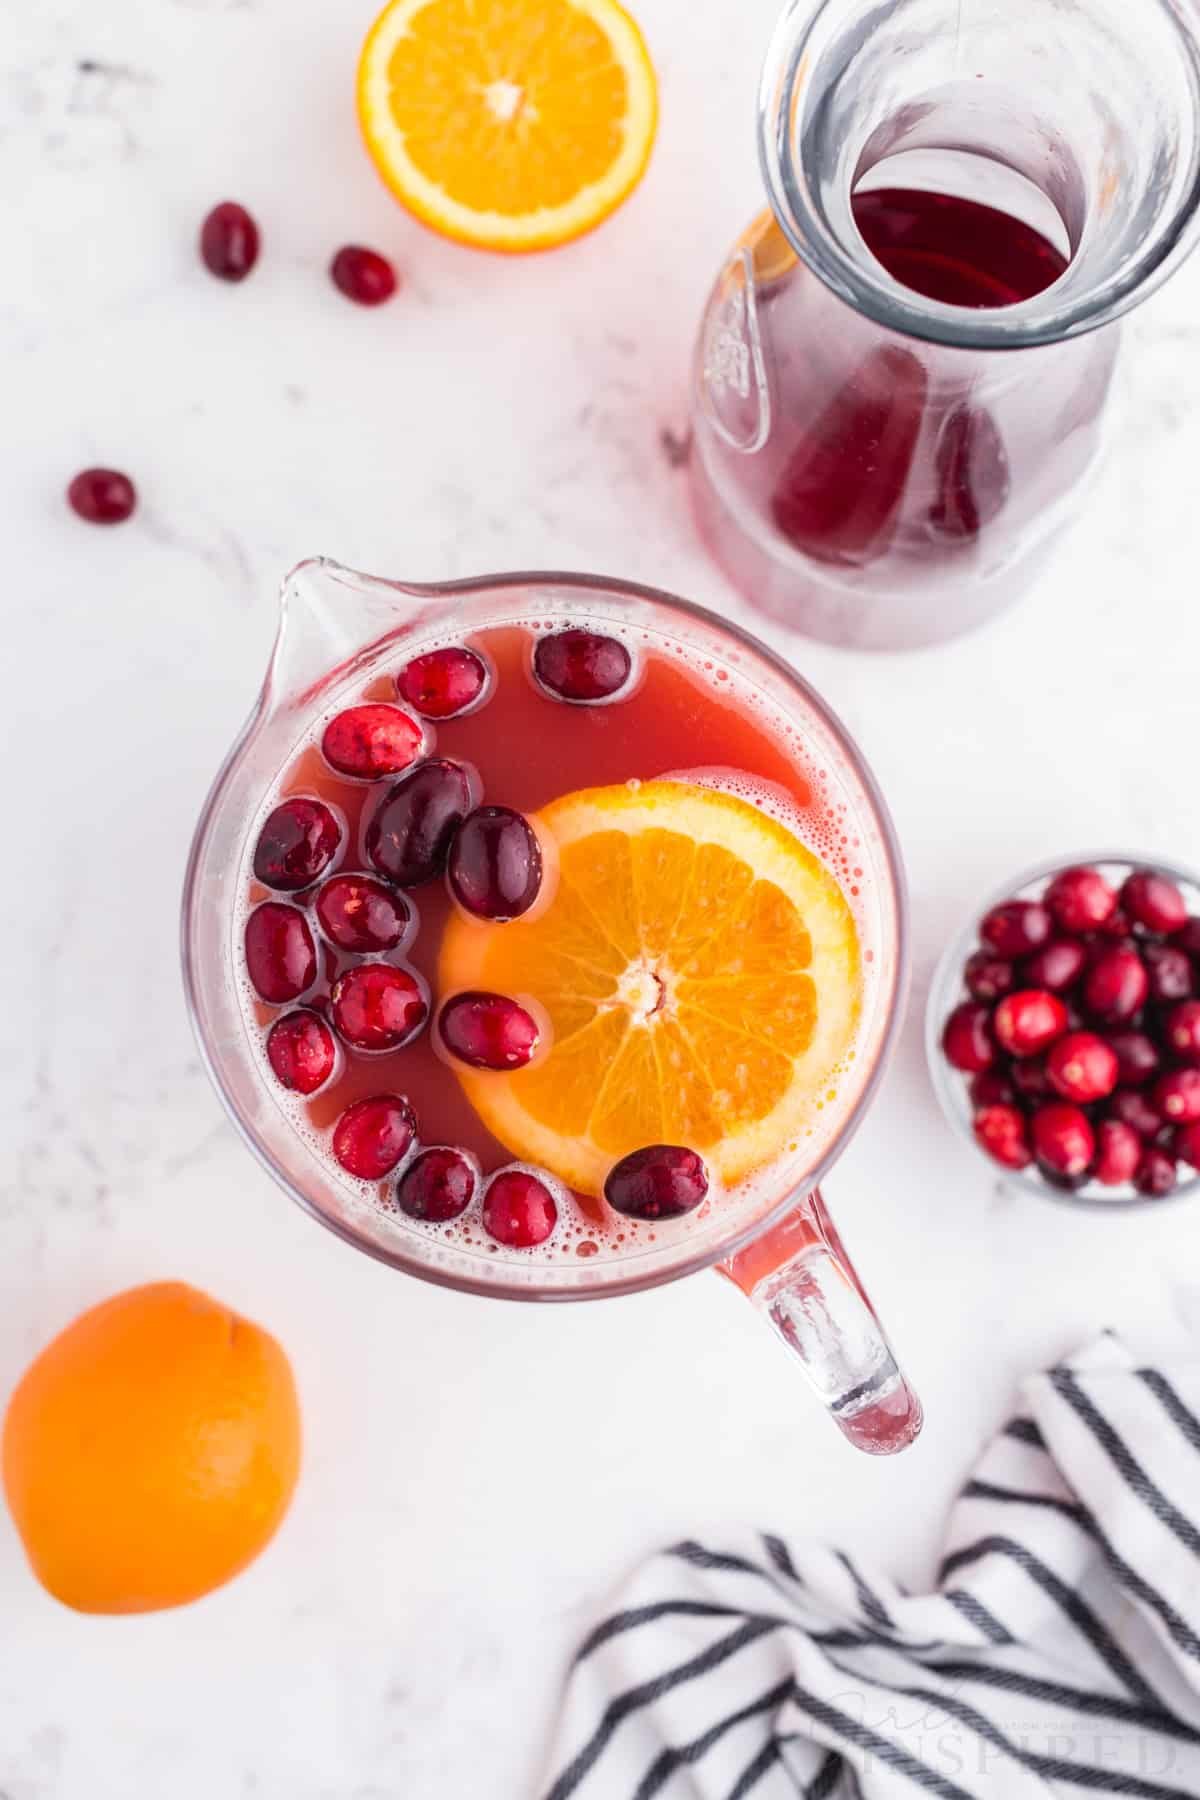 Overhead view of Christmas punch in a pitcher, striped linen, empty glass jug, bowl of cranberries, sliced orange, on a marble countertop.